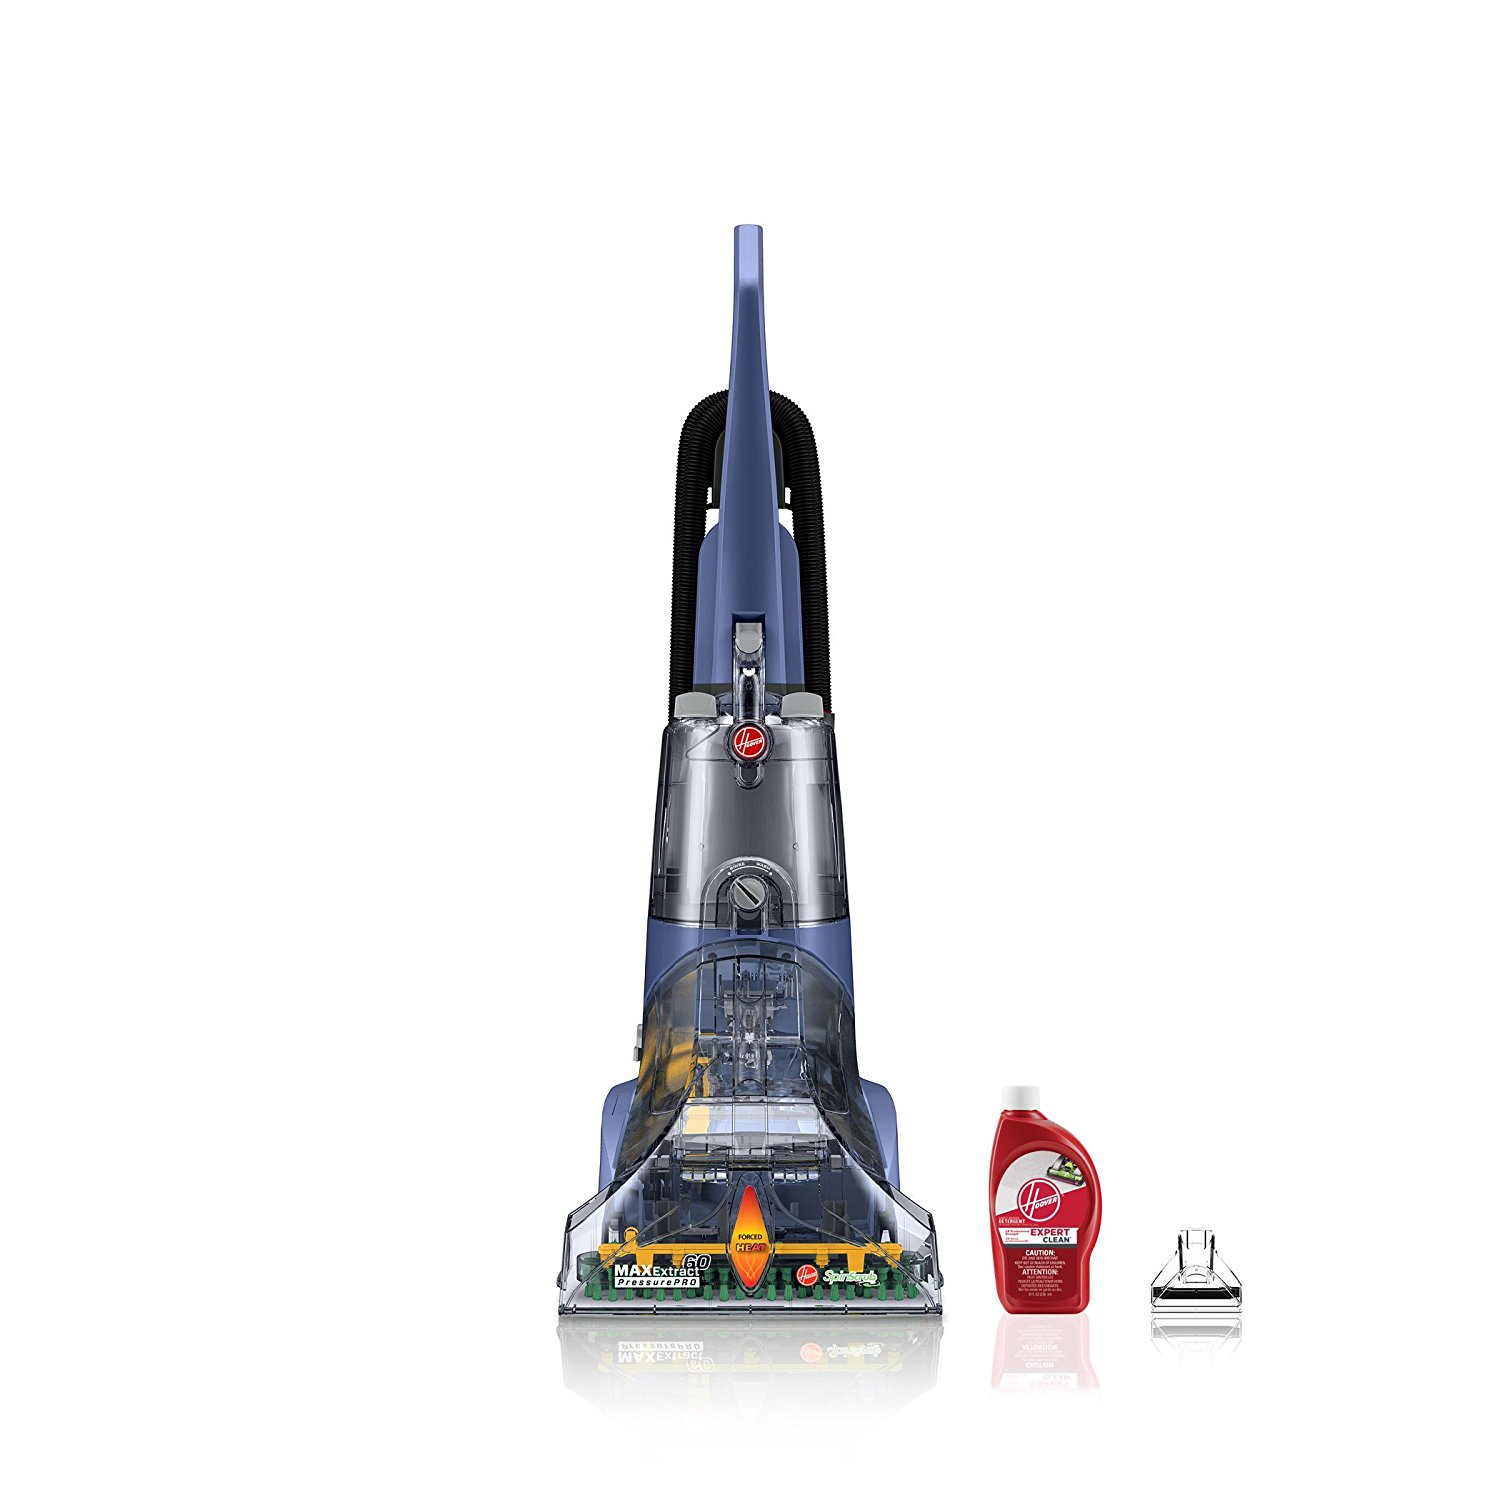 Prime members: Hoover Max Extract 60 Pressure Pro carpet deep cleaner for $100